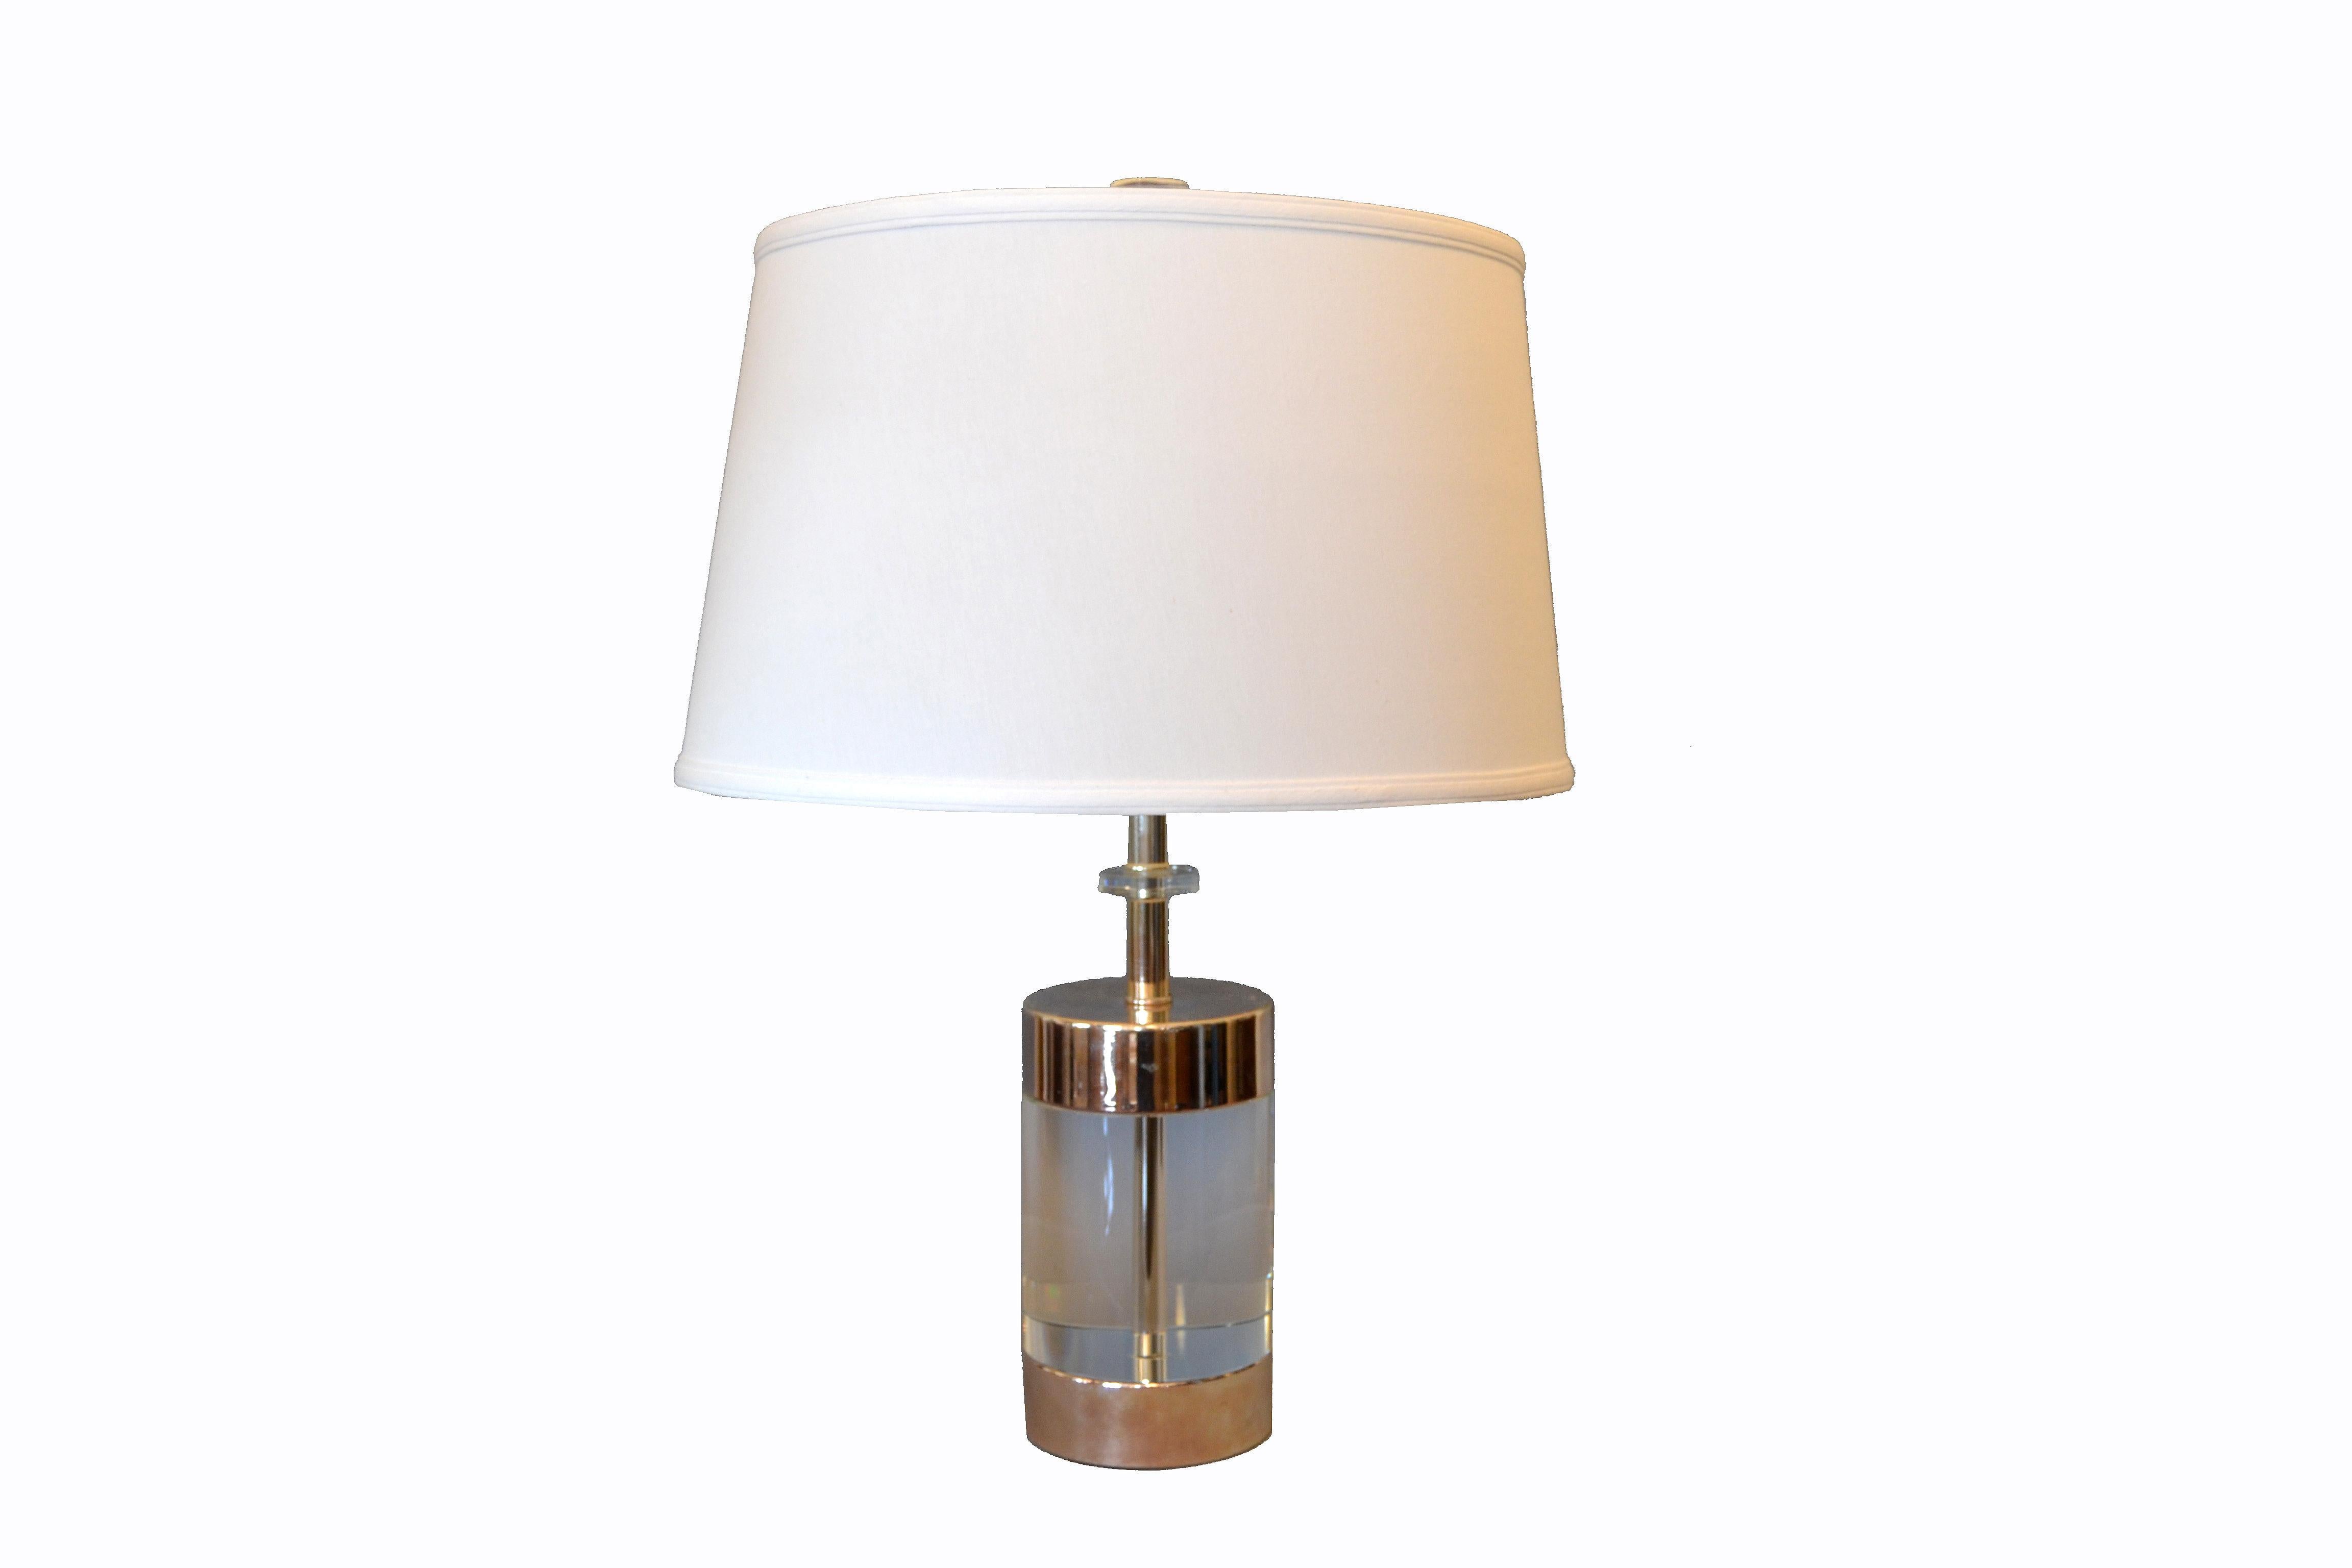 Mid-Century Modern Lucite and nickel table lamp.
It is in perfect working condition and uses a max. 60 watts light bulb.
Comes with harp and finial, but no shade.
The Lucite is very thick and the lamp is heavy.
Dimensions:
Height to top: 29